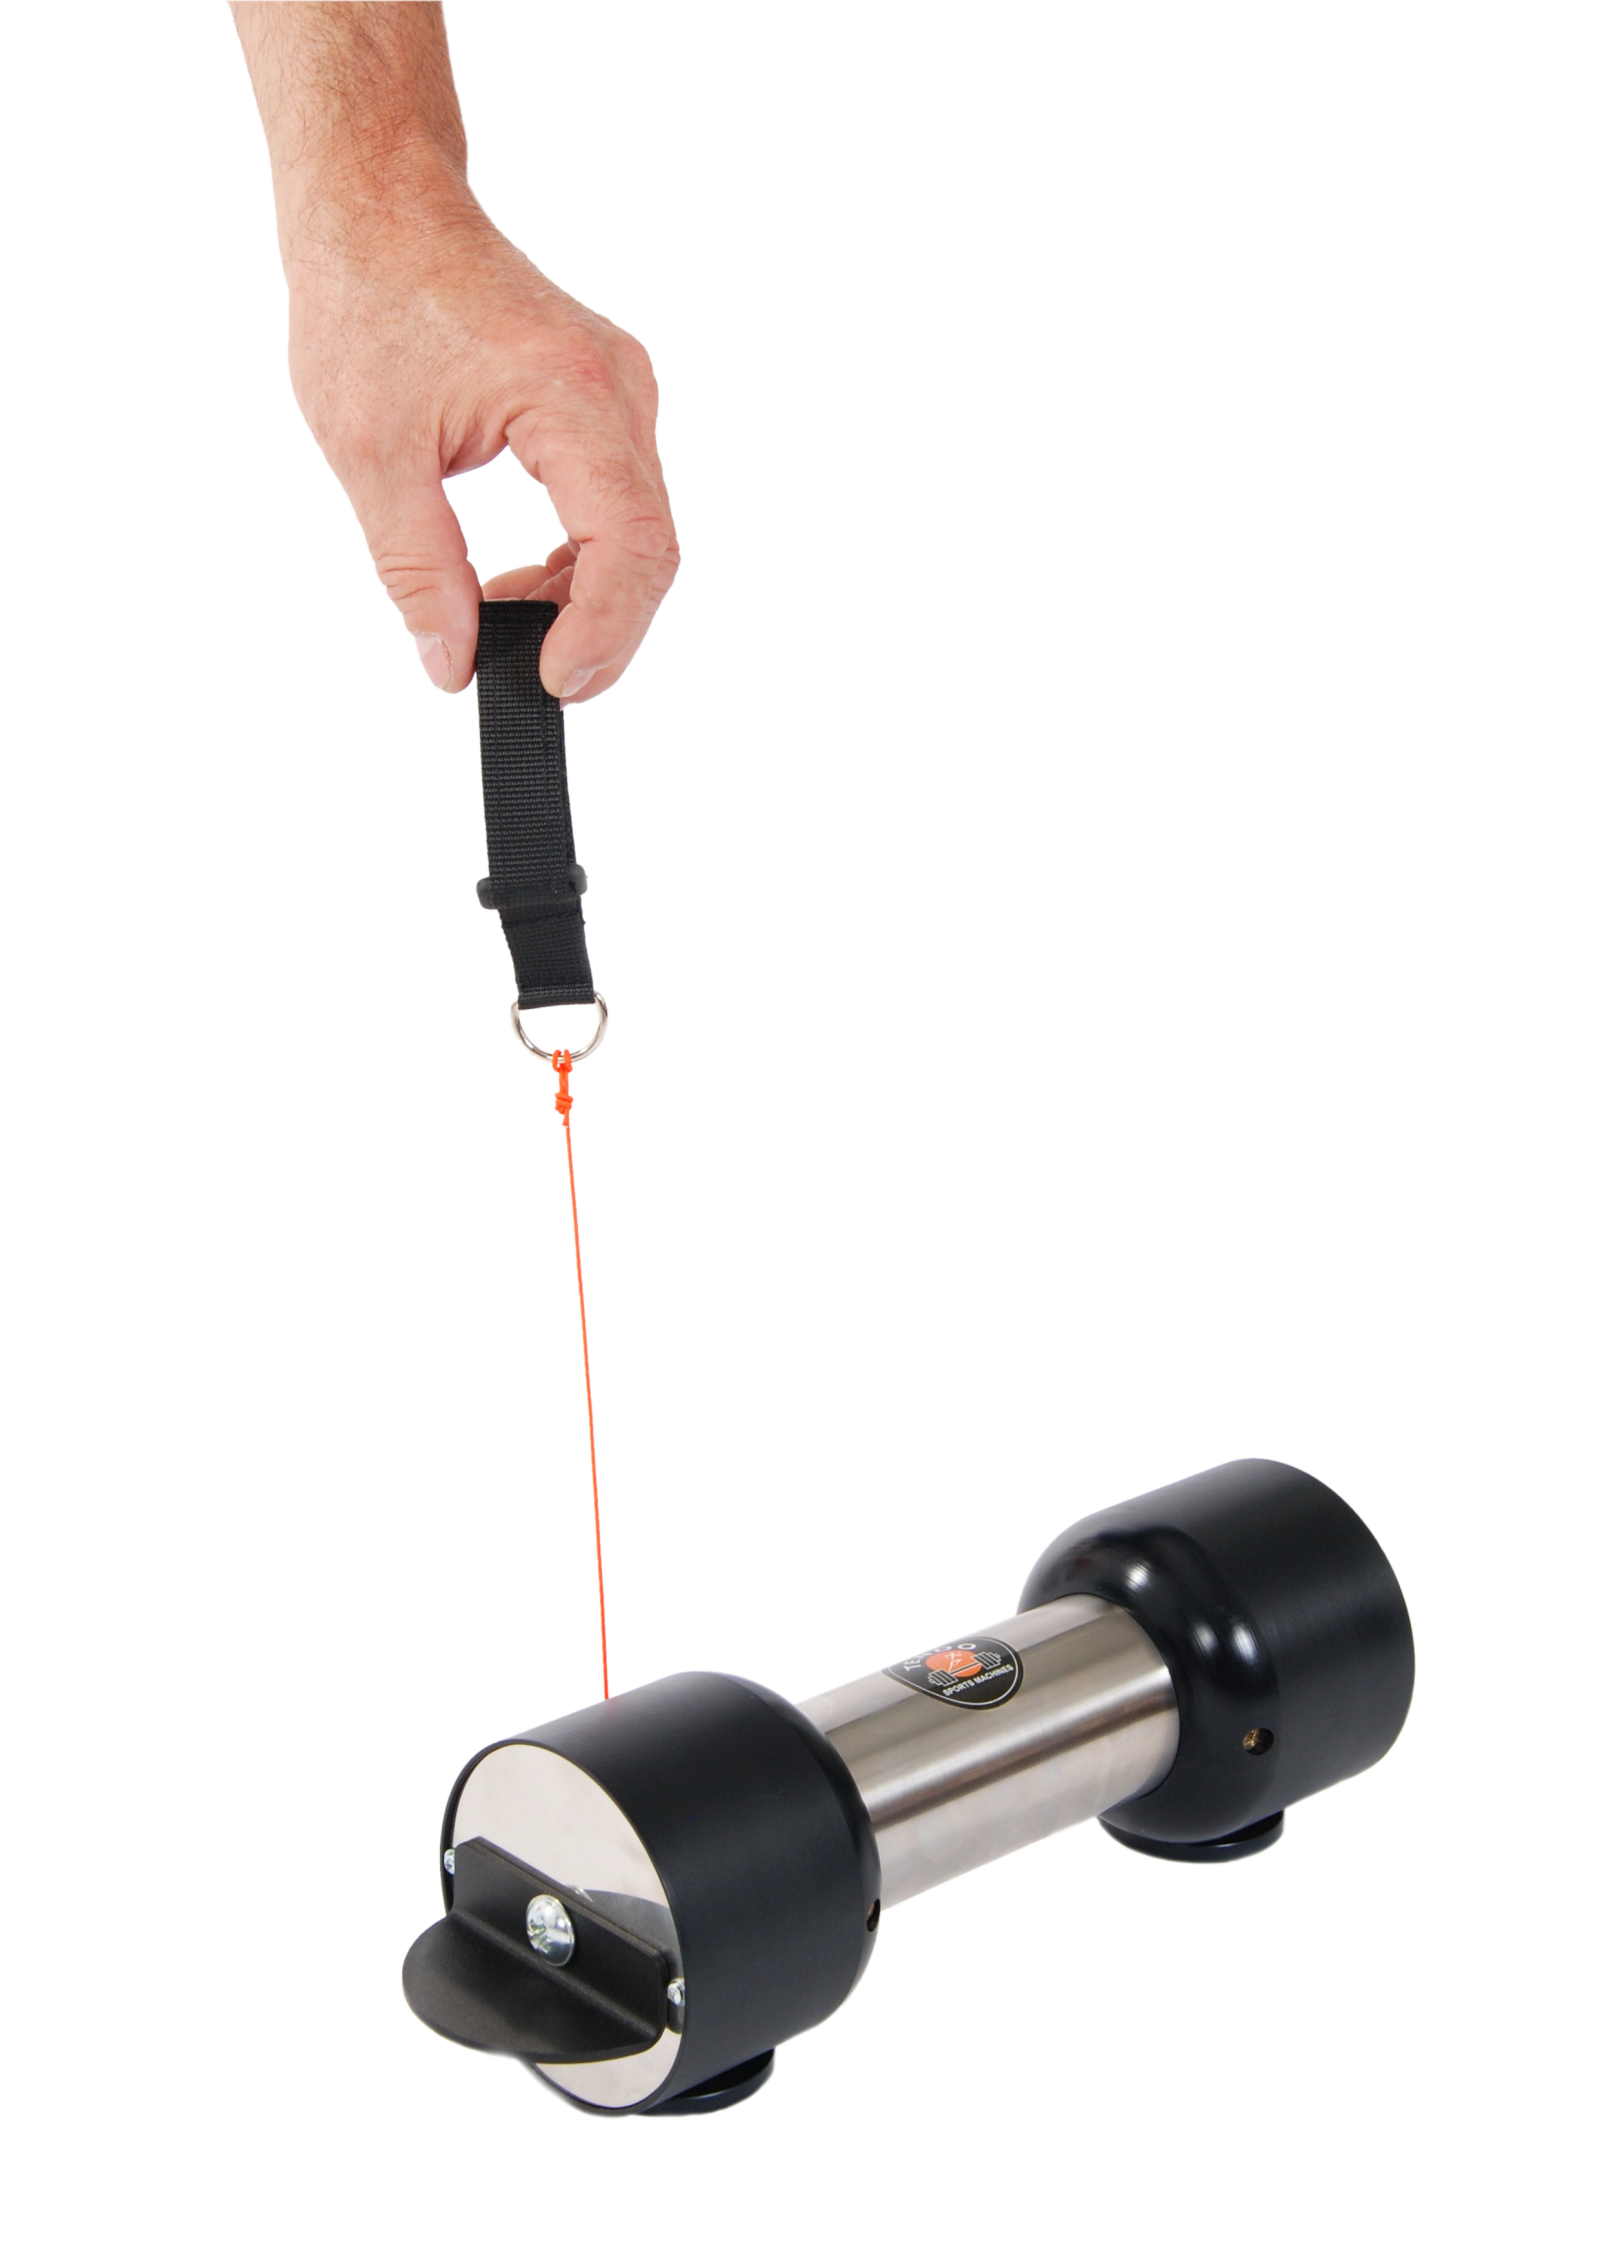 Tendo Unit linear positioning transducer sensor with a hand pulling the sting by Tendo Sport